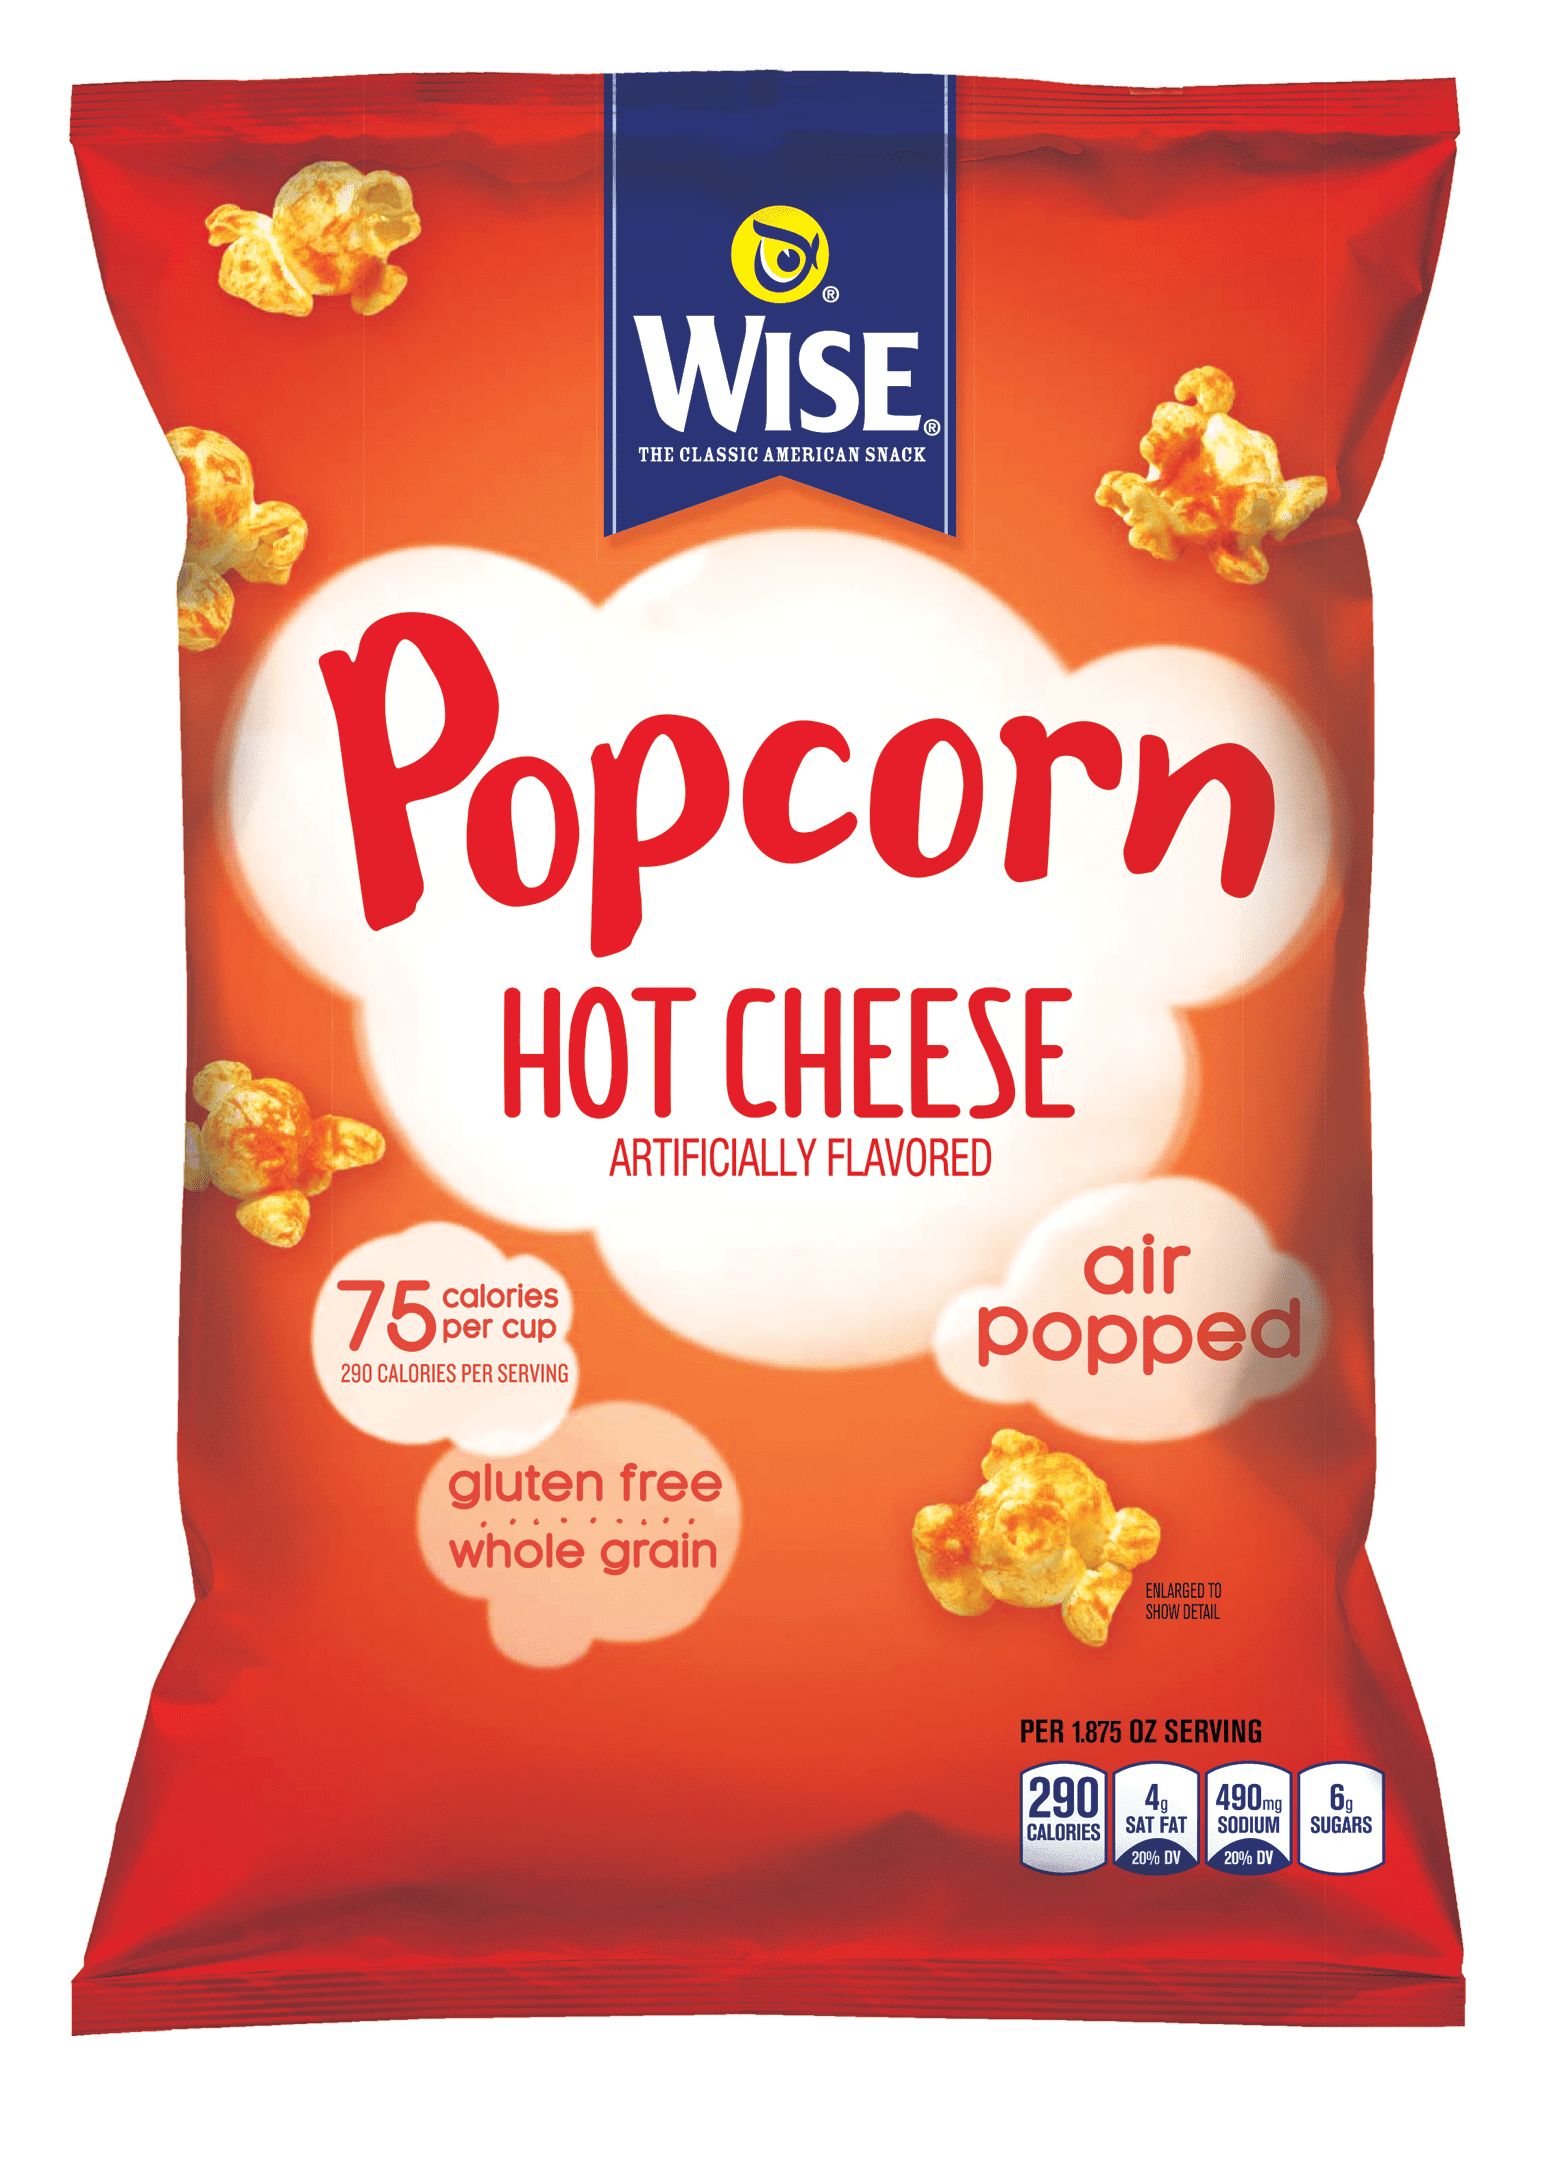 buy-wise-snacks-popcorn-hot-cheese-0-625-ounce-36-count-gluten